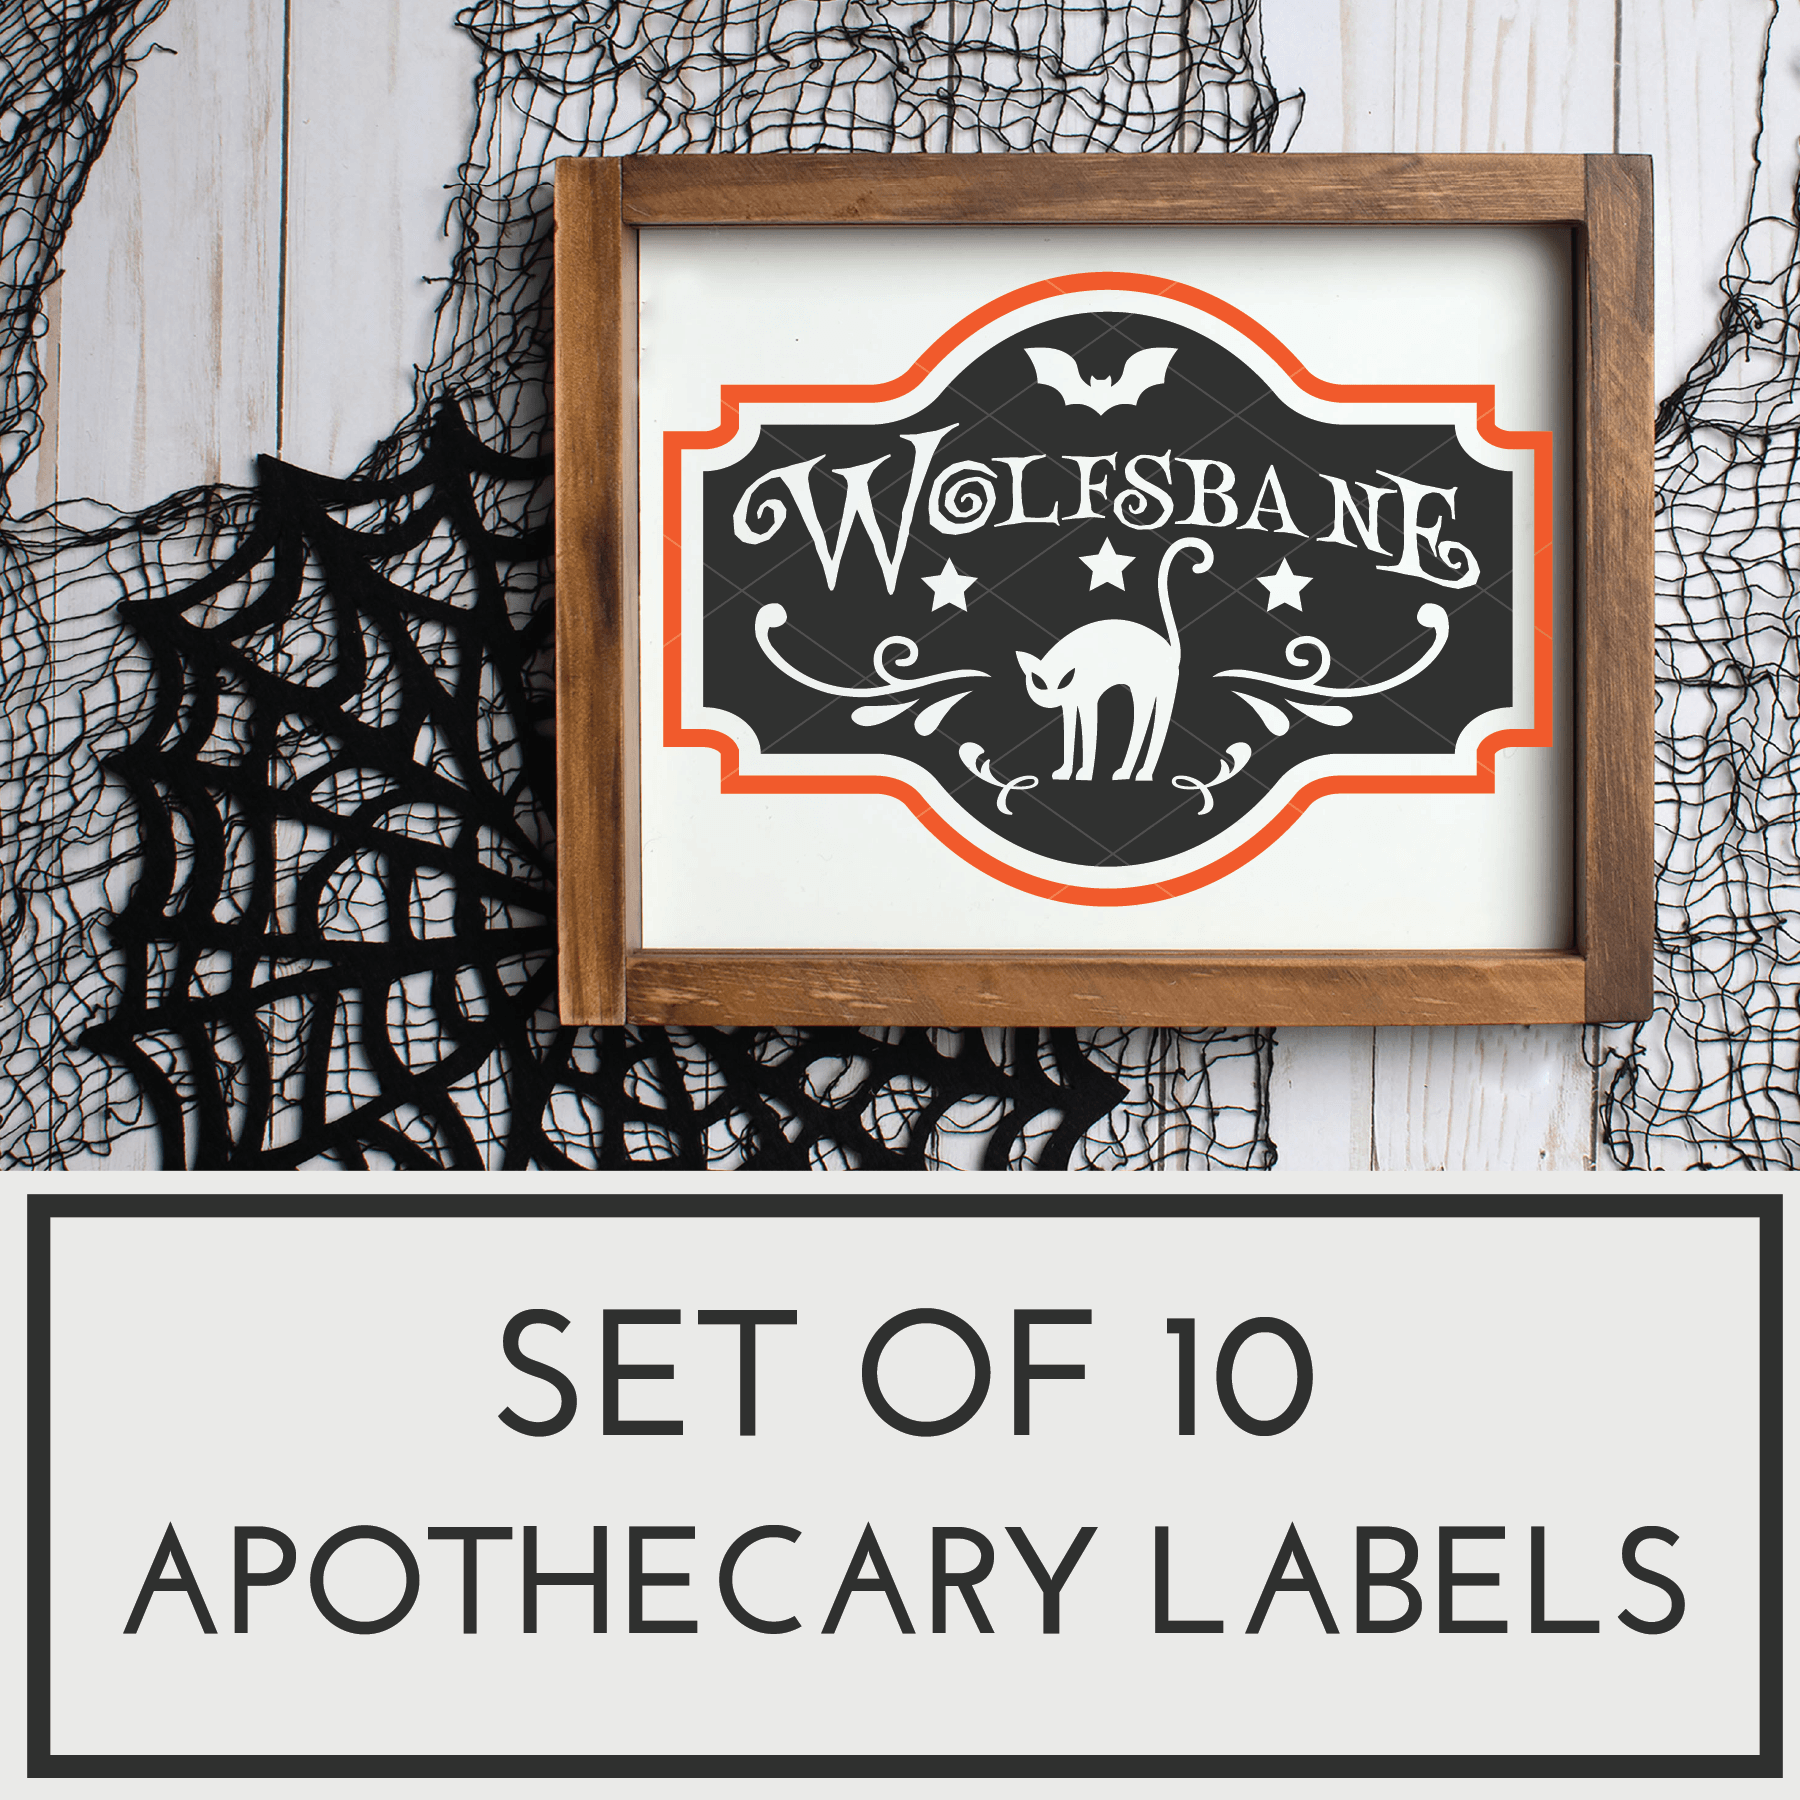 Set of 10 Spooky Halloween Apothecary Label SVG Files - Commercial Use SVG Files for Cricut & Silhouette